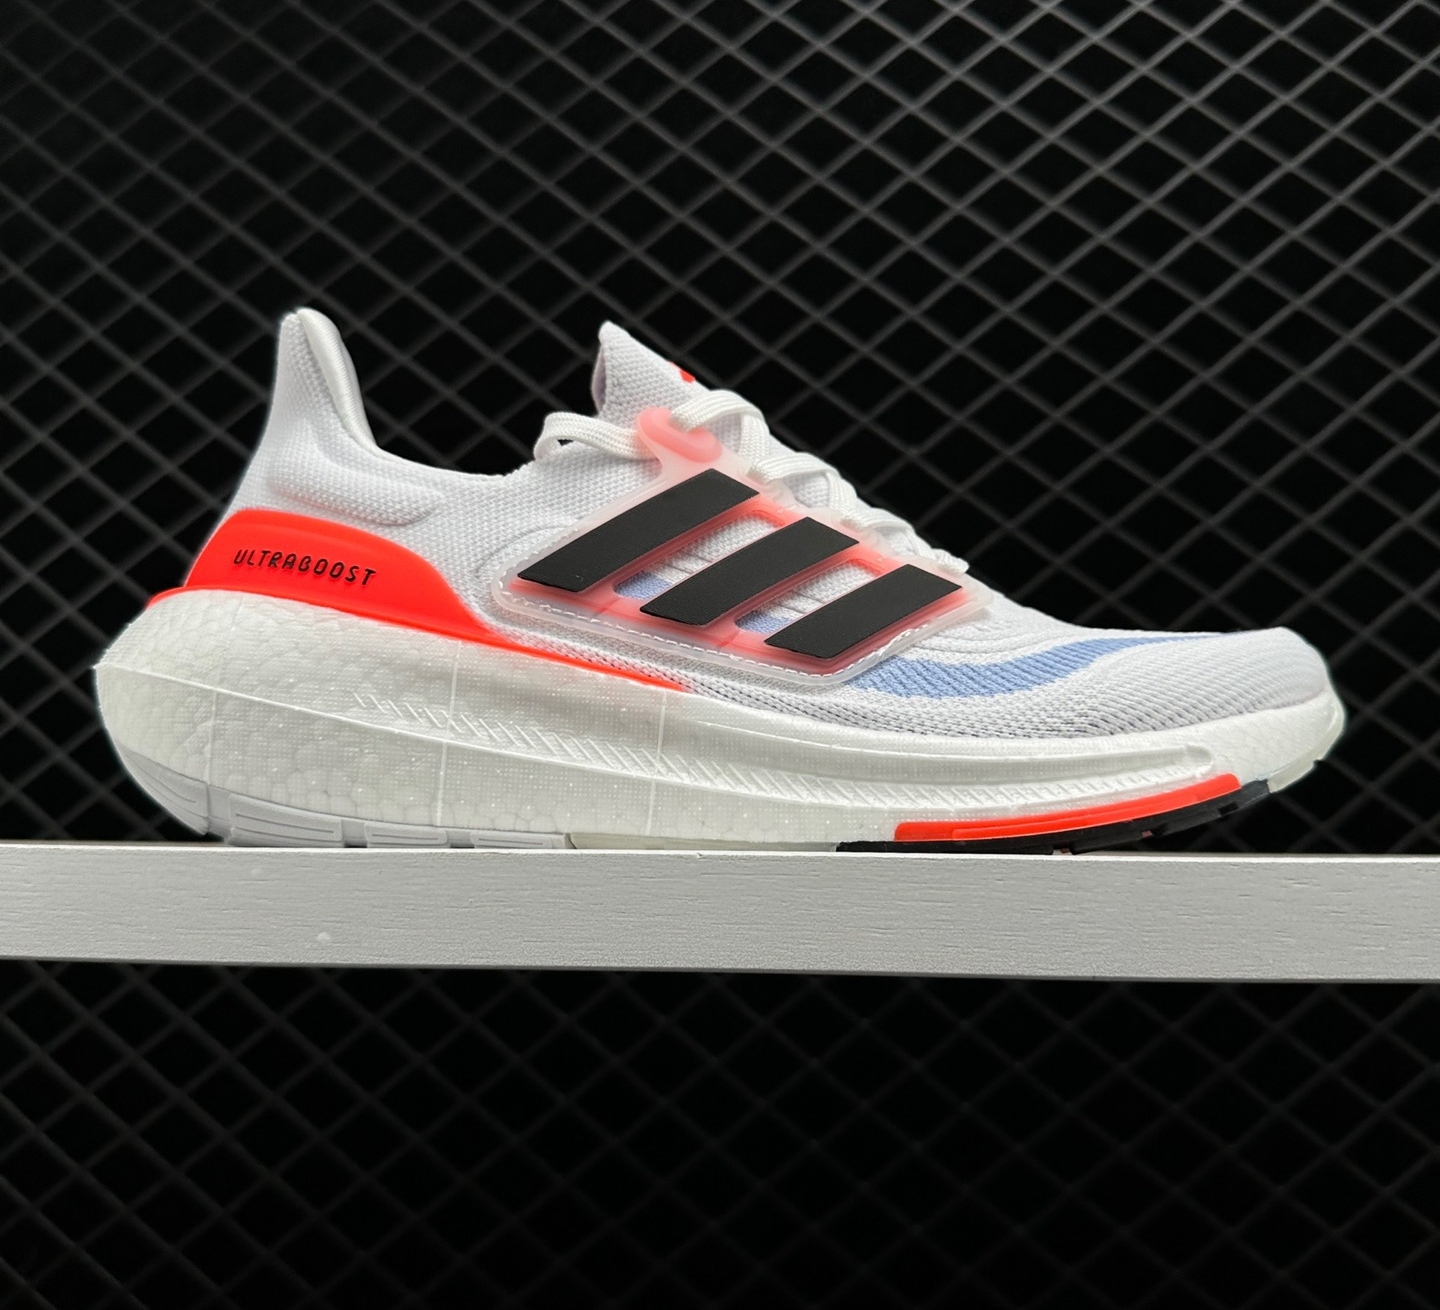 Adidas Ultra Boost Light White Black Solar Red Running Shoes